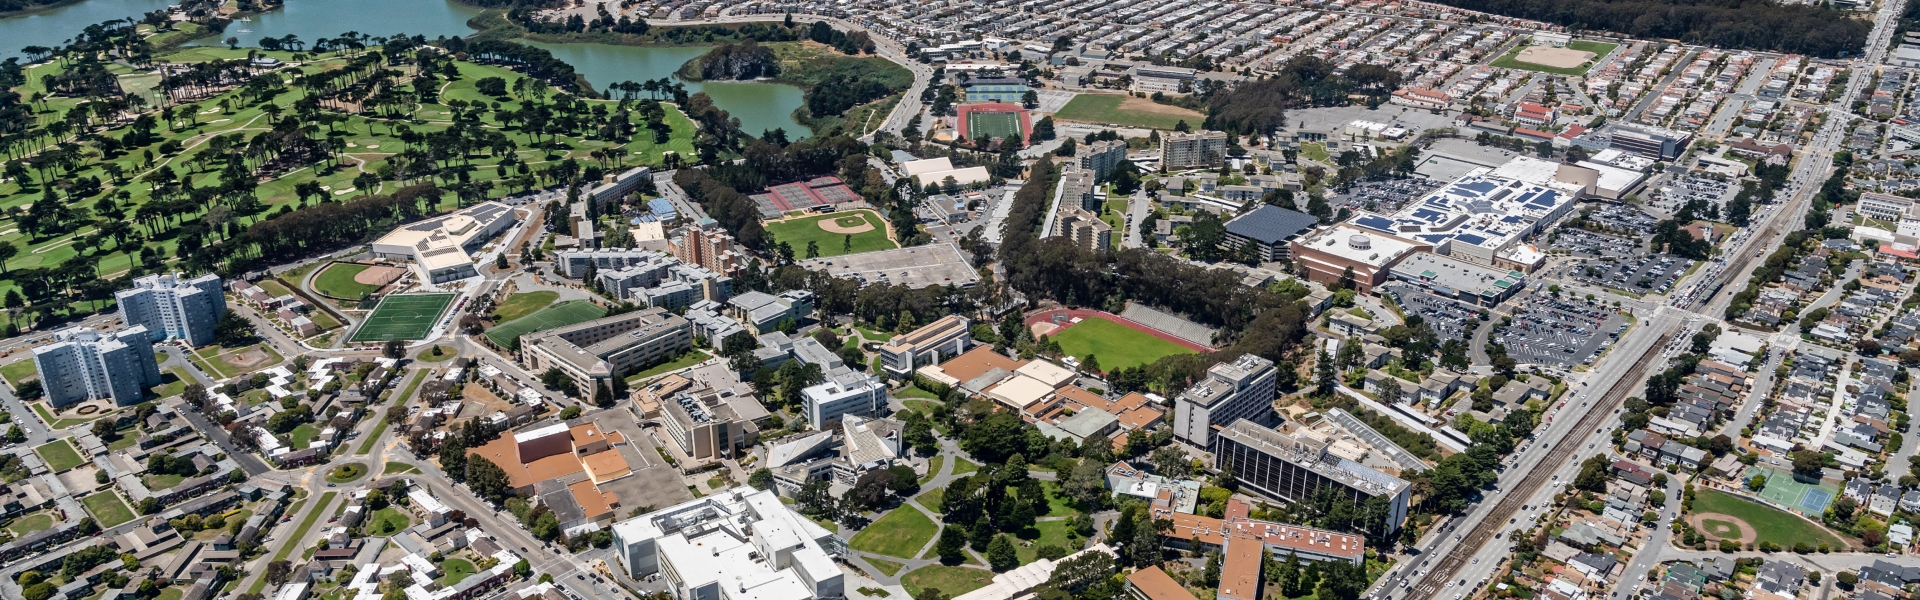 campus from the remote view